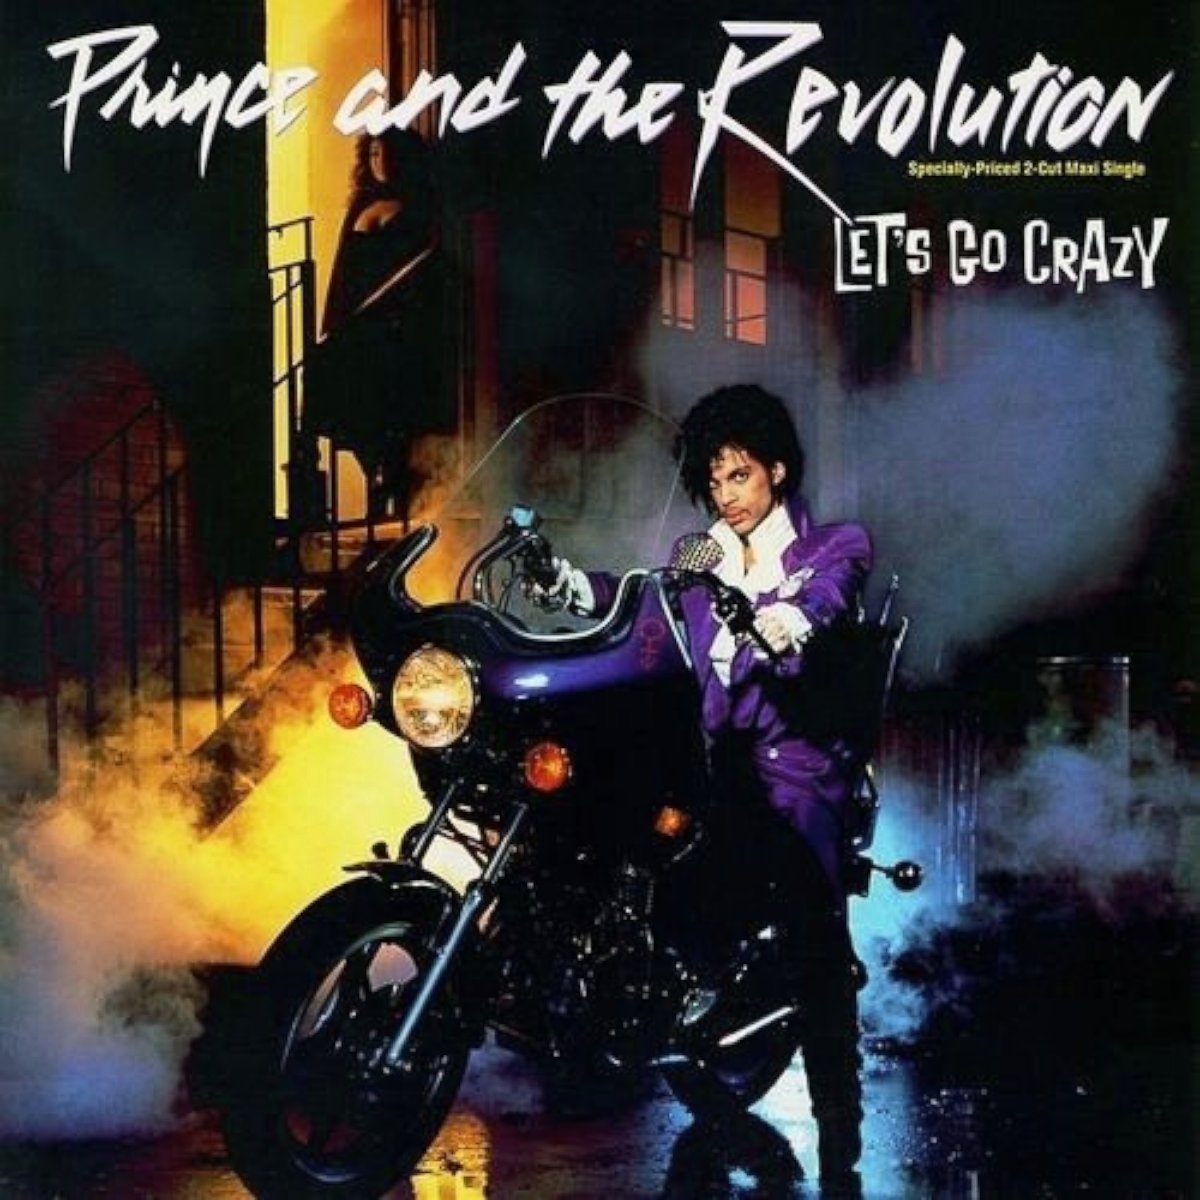 PHOTO:Prince and the Revolution's single album cover for Let's Go Crazy.  